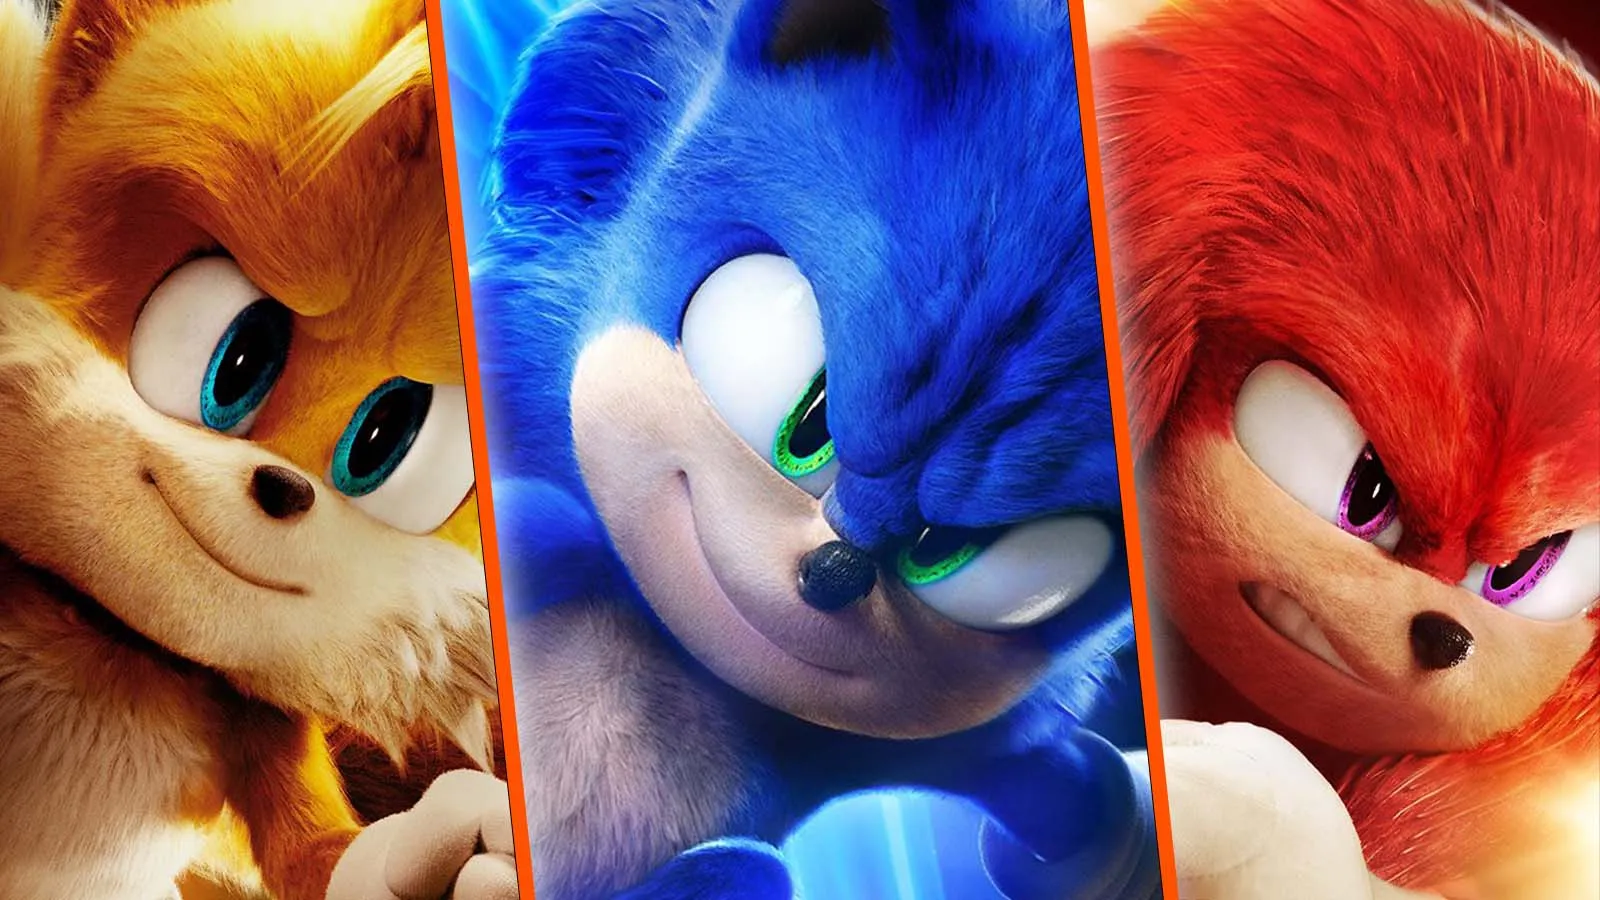 Sonic The Hedgehog 2' Box Office Breaks Video Game Adaptation Record With  $71 Million - 9GAG